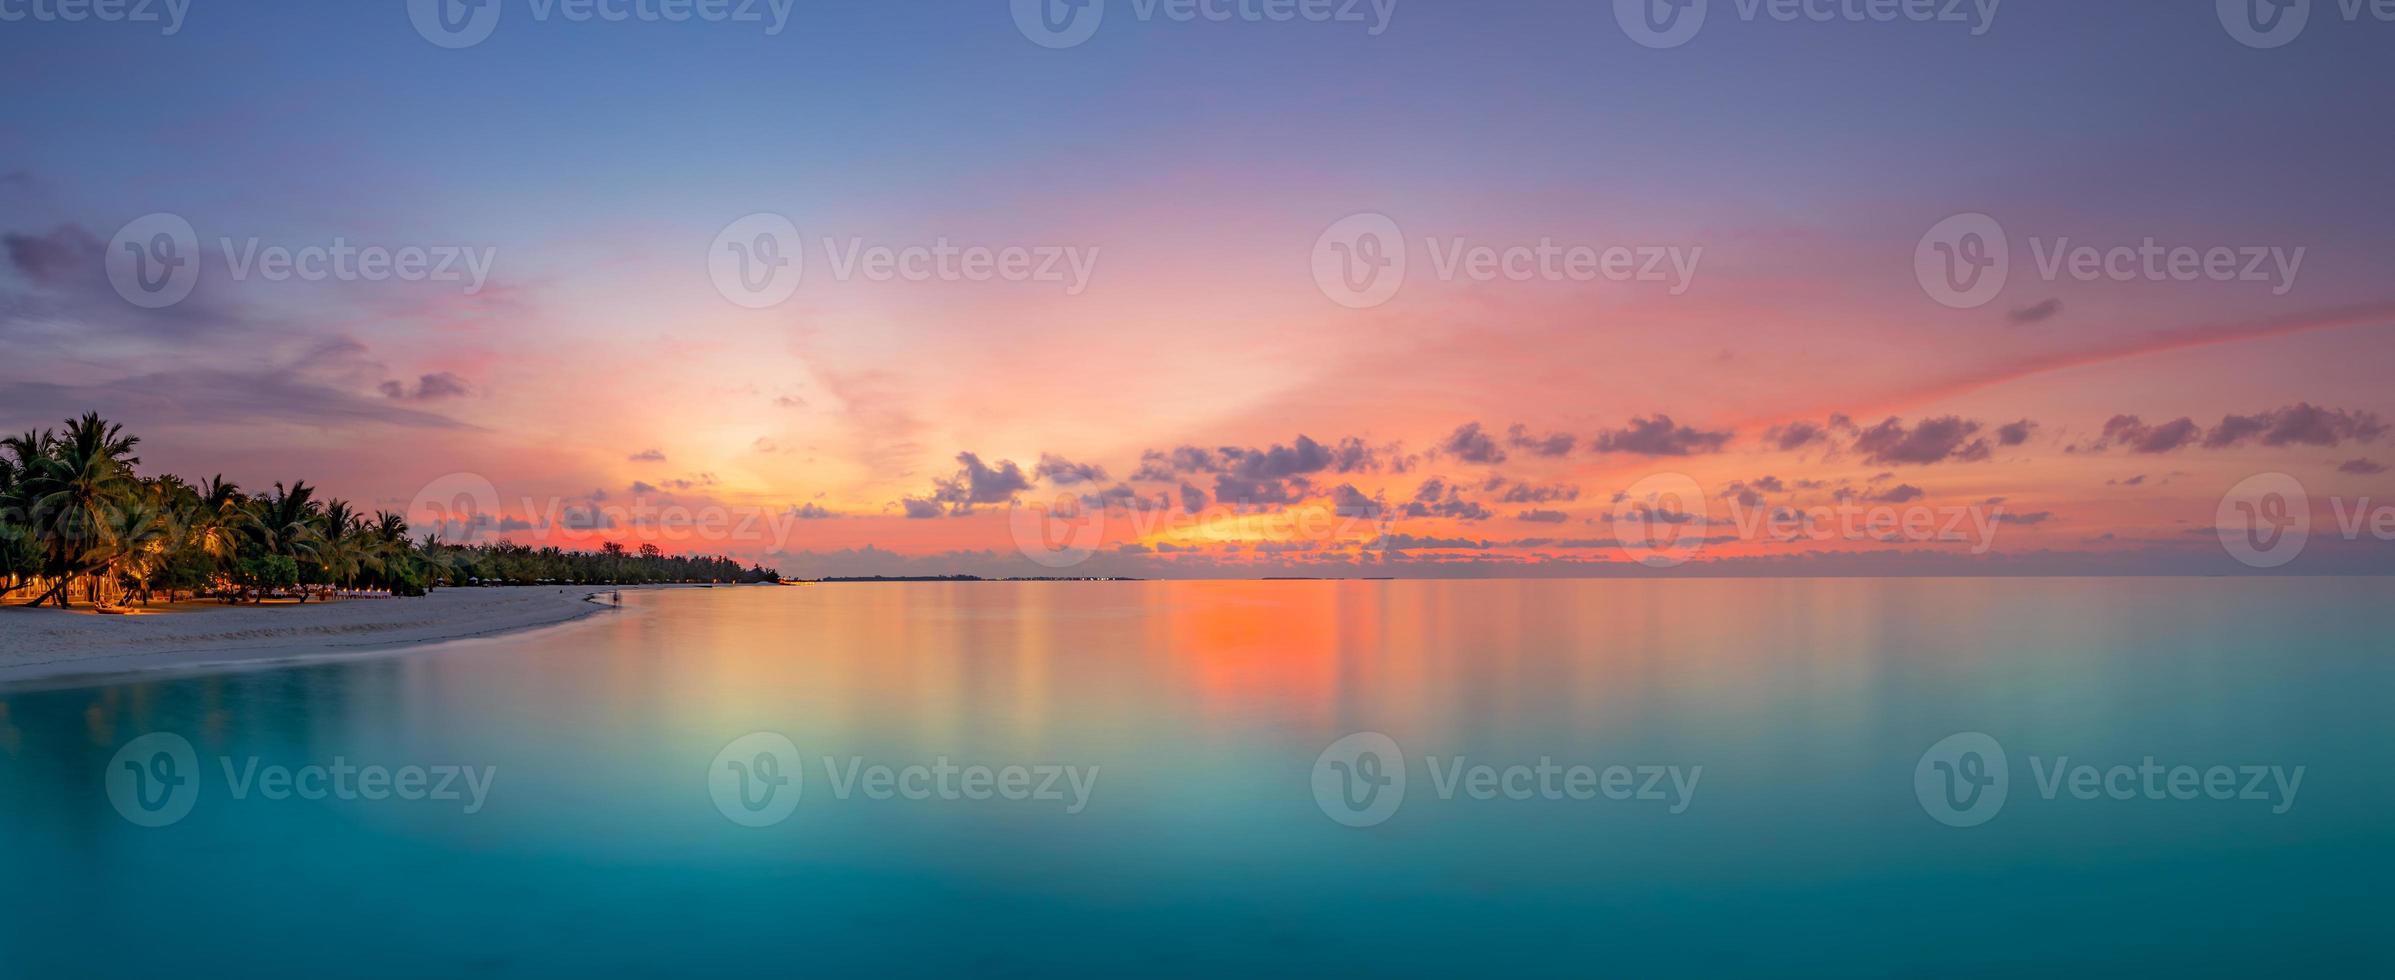 Beautiful panoramic sunset tropical paradise beach. Tranquil summer vacation or holiday landscape. Tropical sunset beach seaside palm calm sea panorama exotic nature view inspirational seascape scenic photo